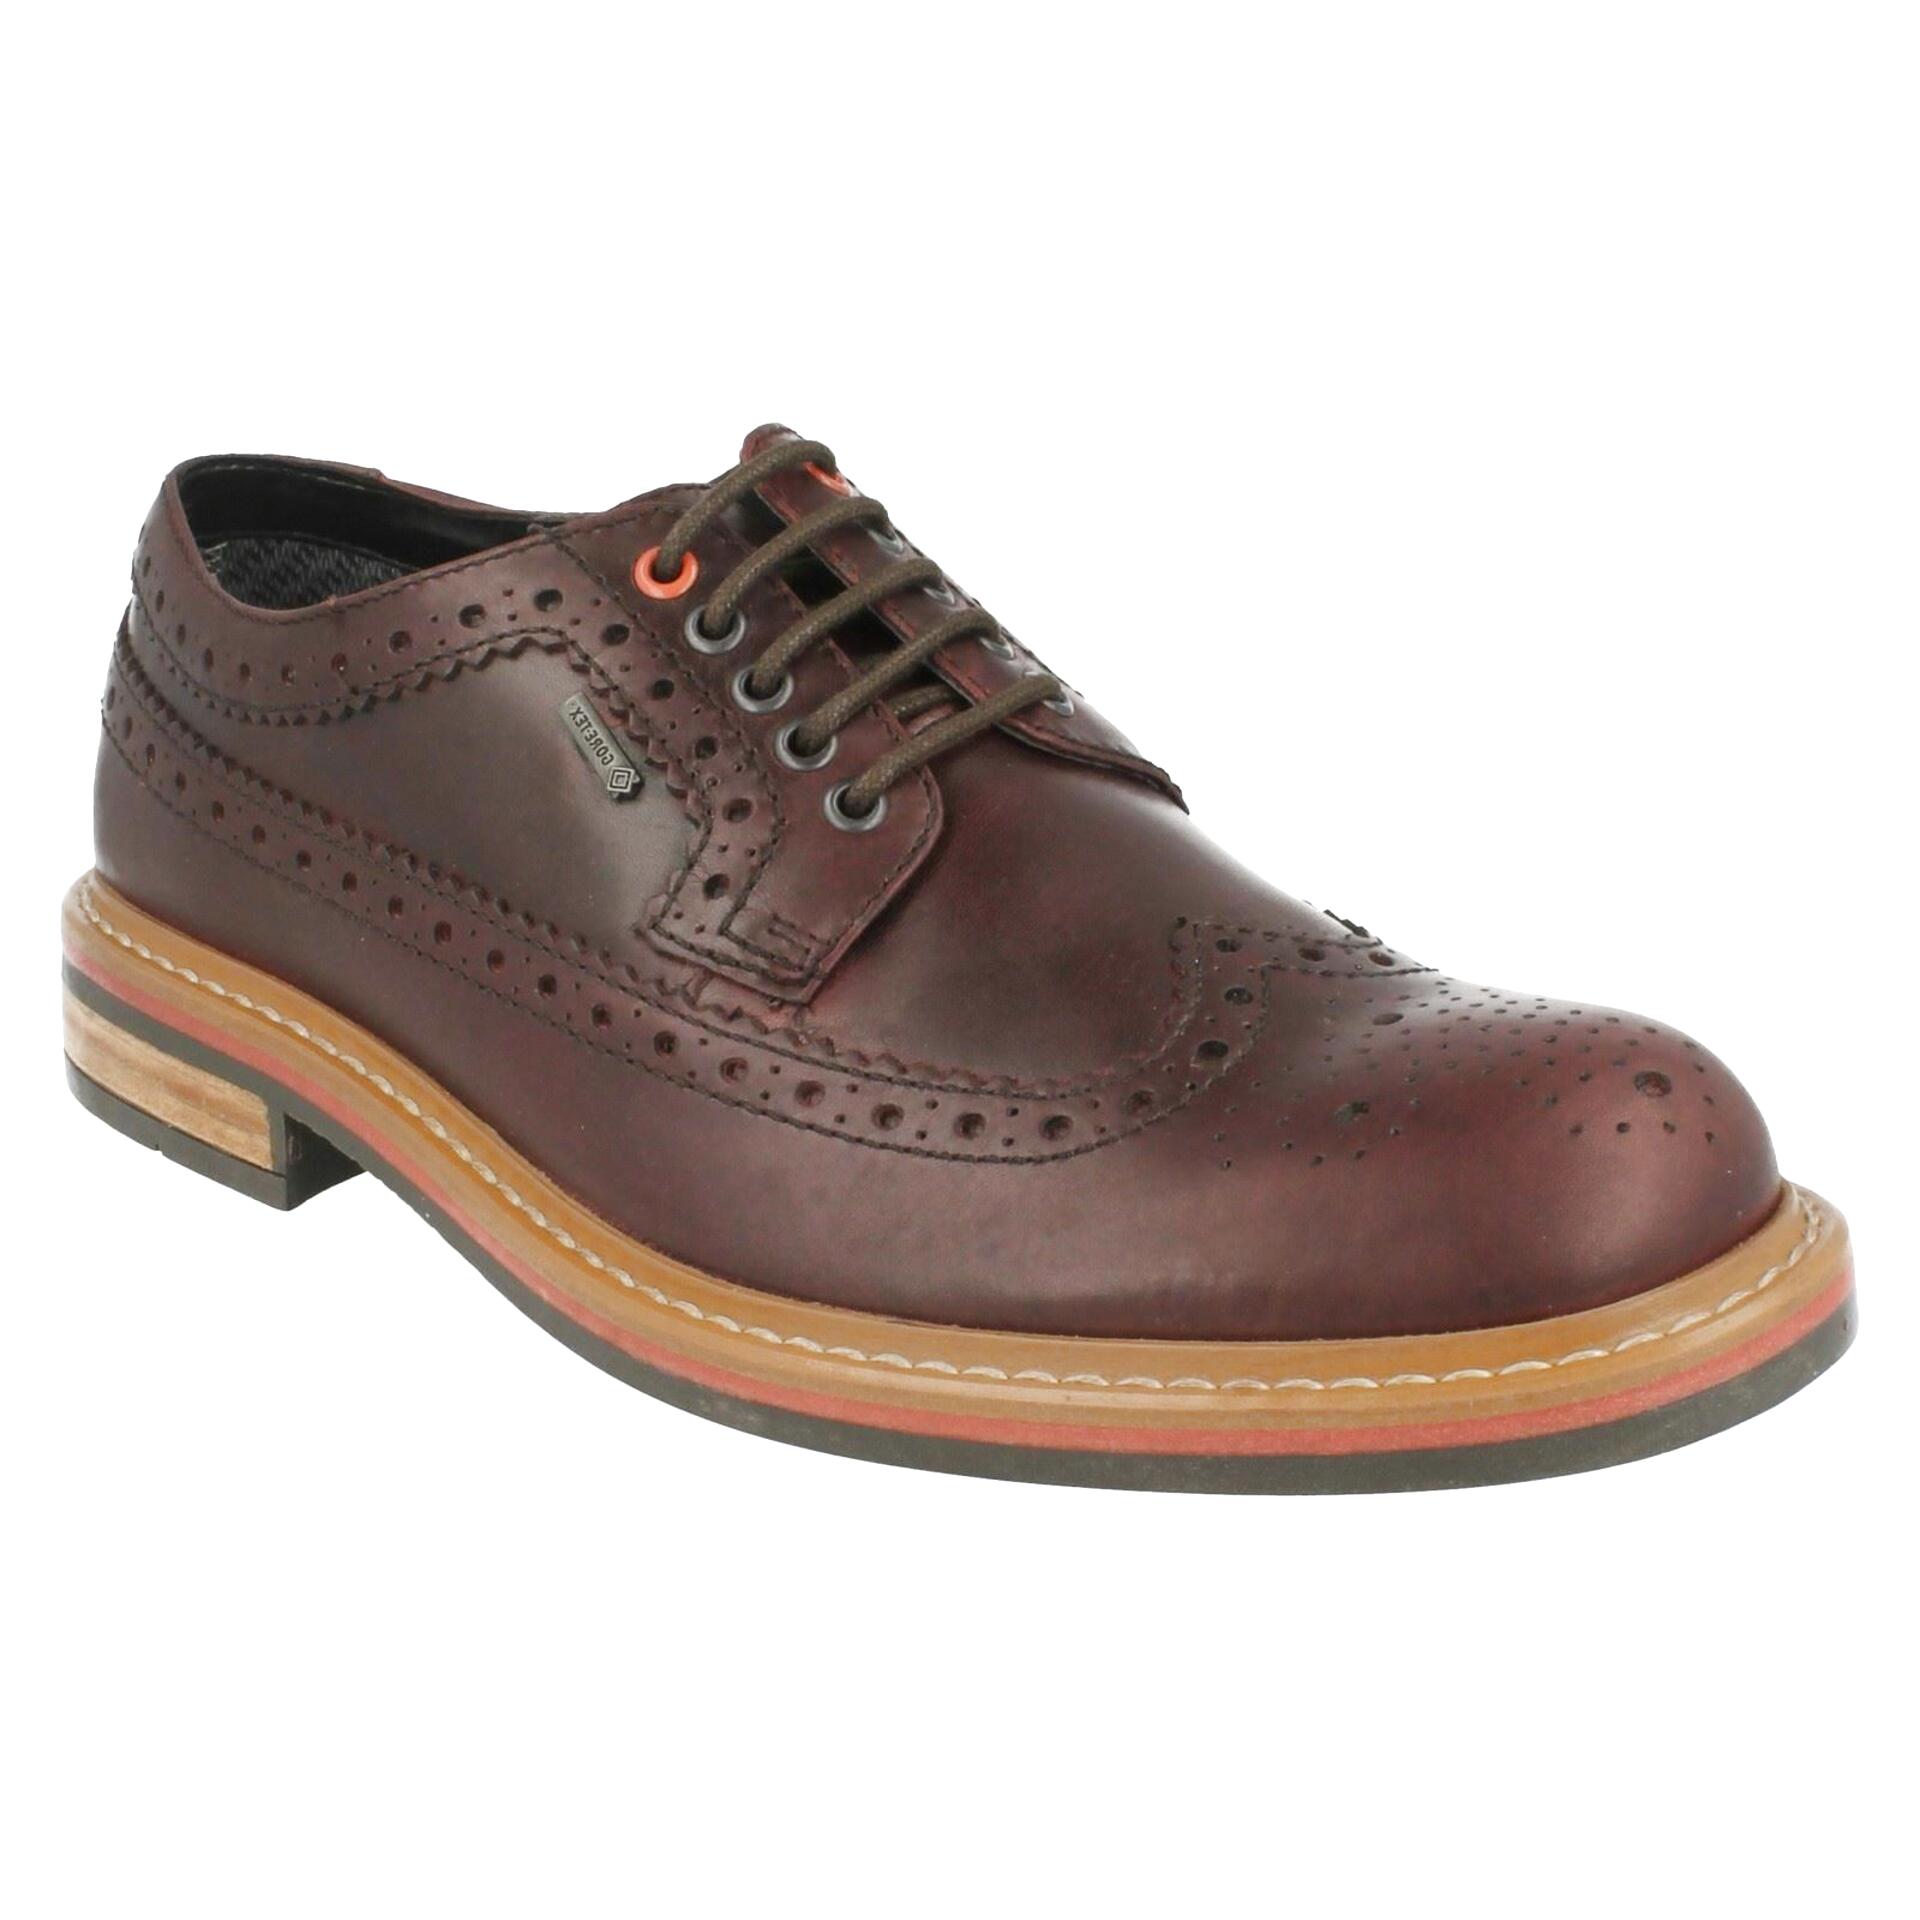 Clarks Brogue Shoes for sale in UK | View 71 bargains